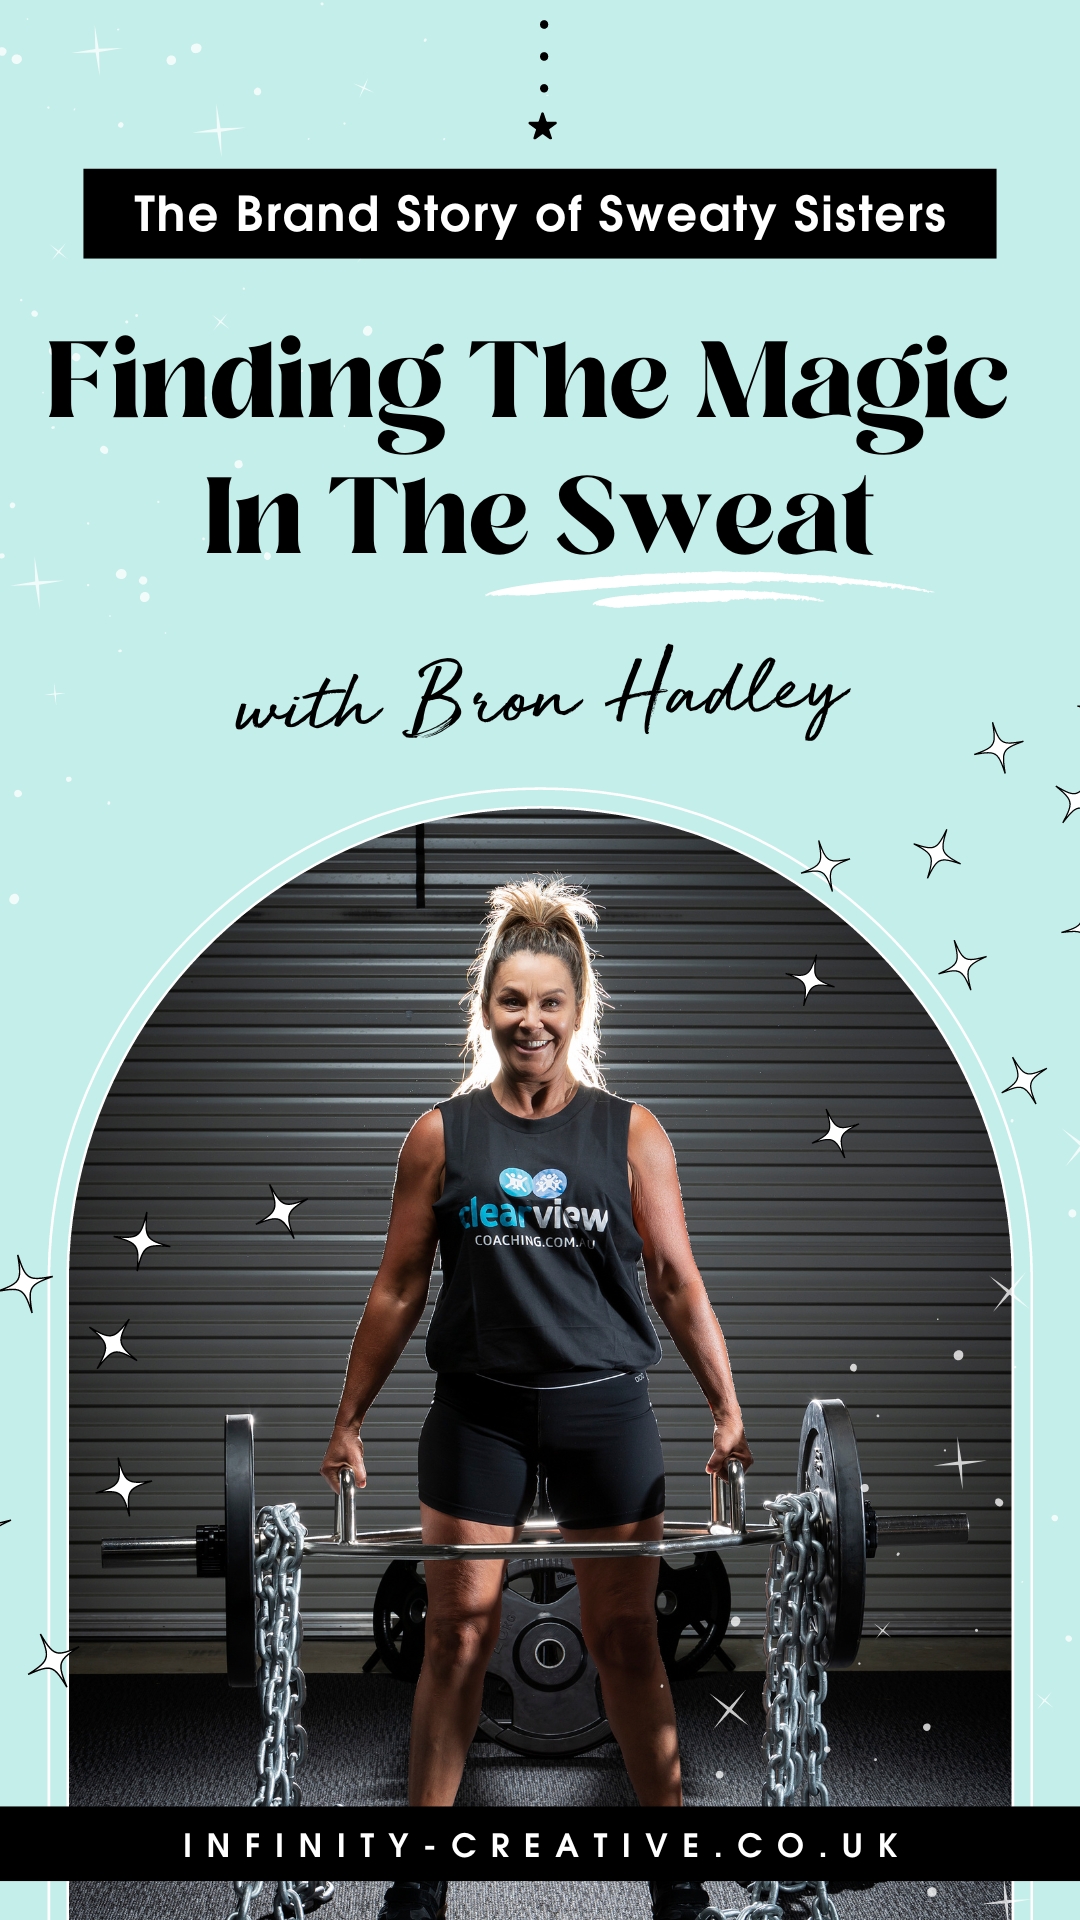 The Brand Story of Sweaty Sisters